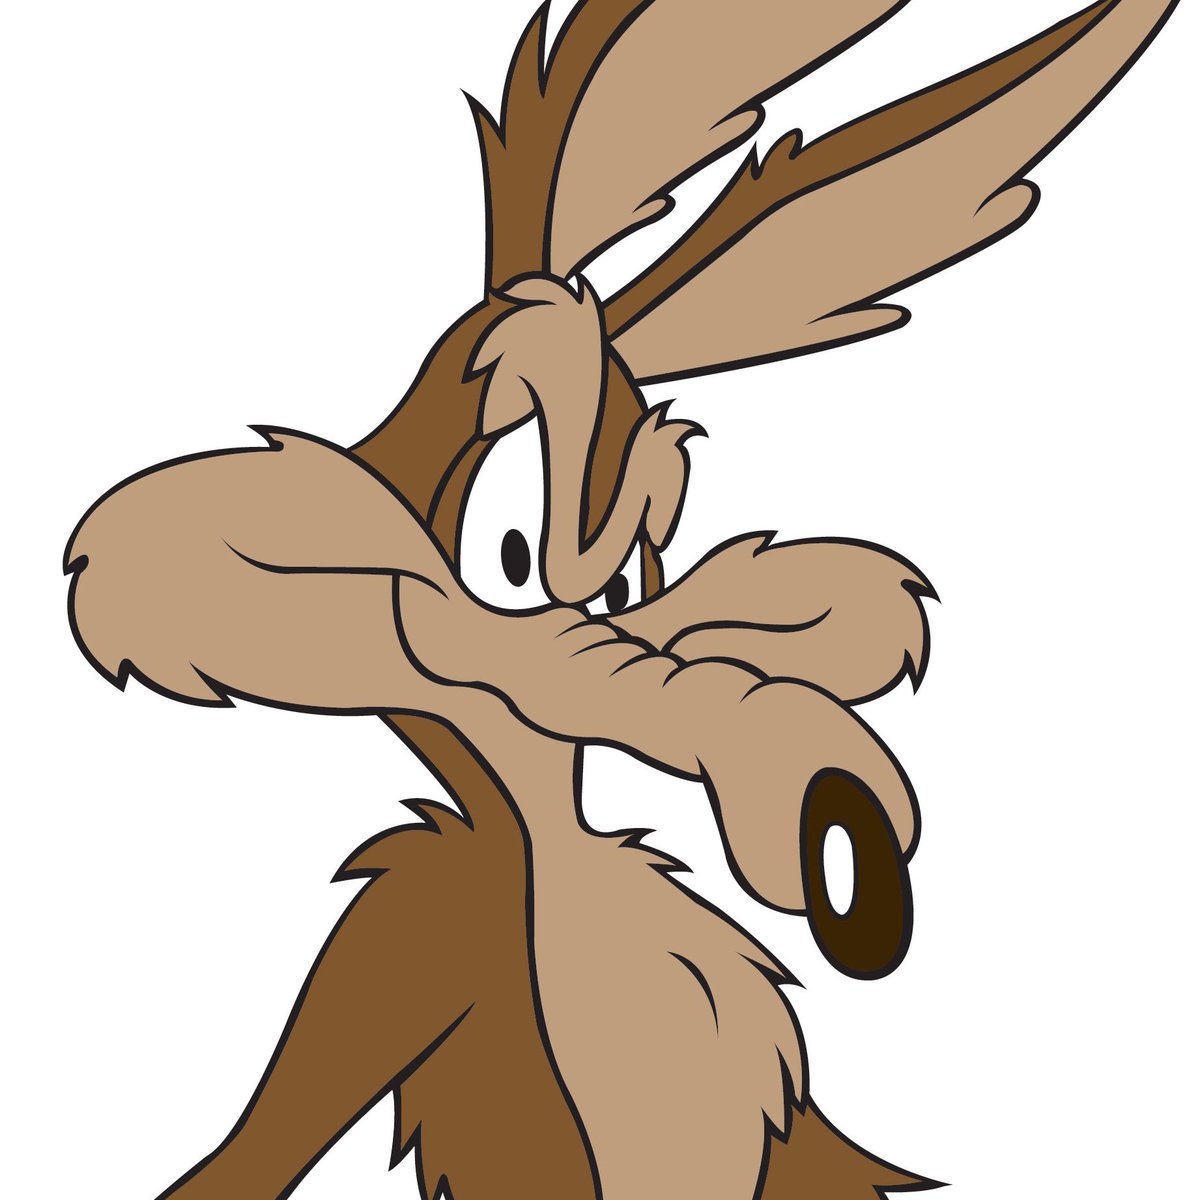 13. Jeff Kennett and Wile E. Coyote